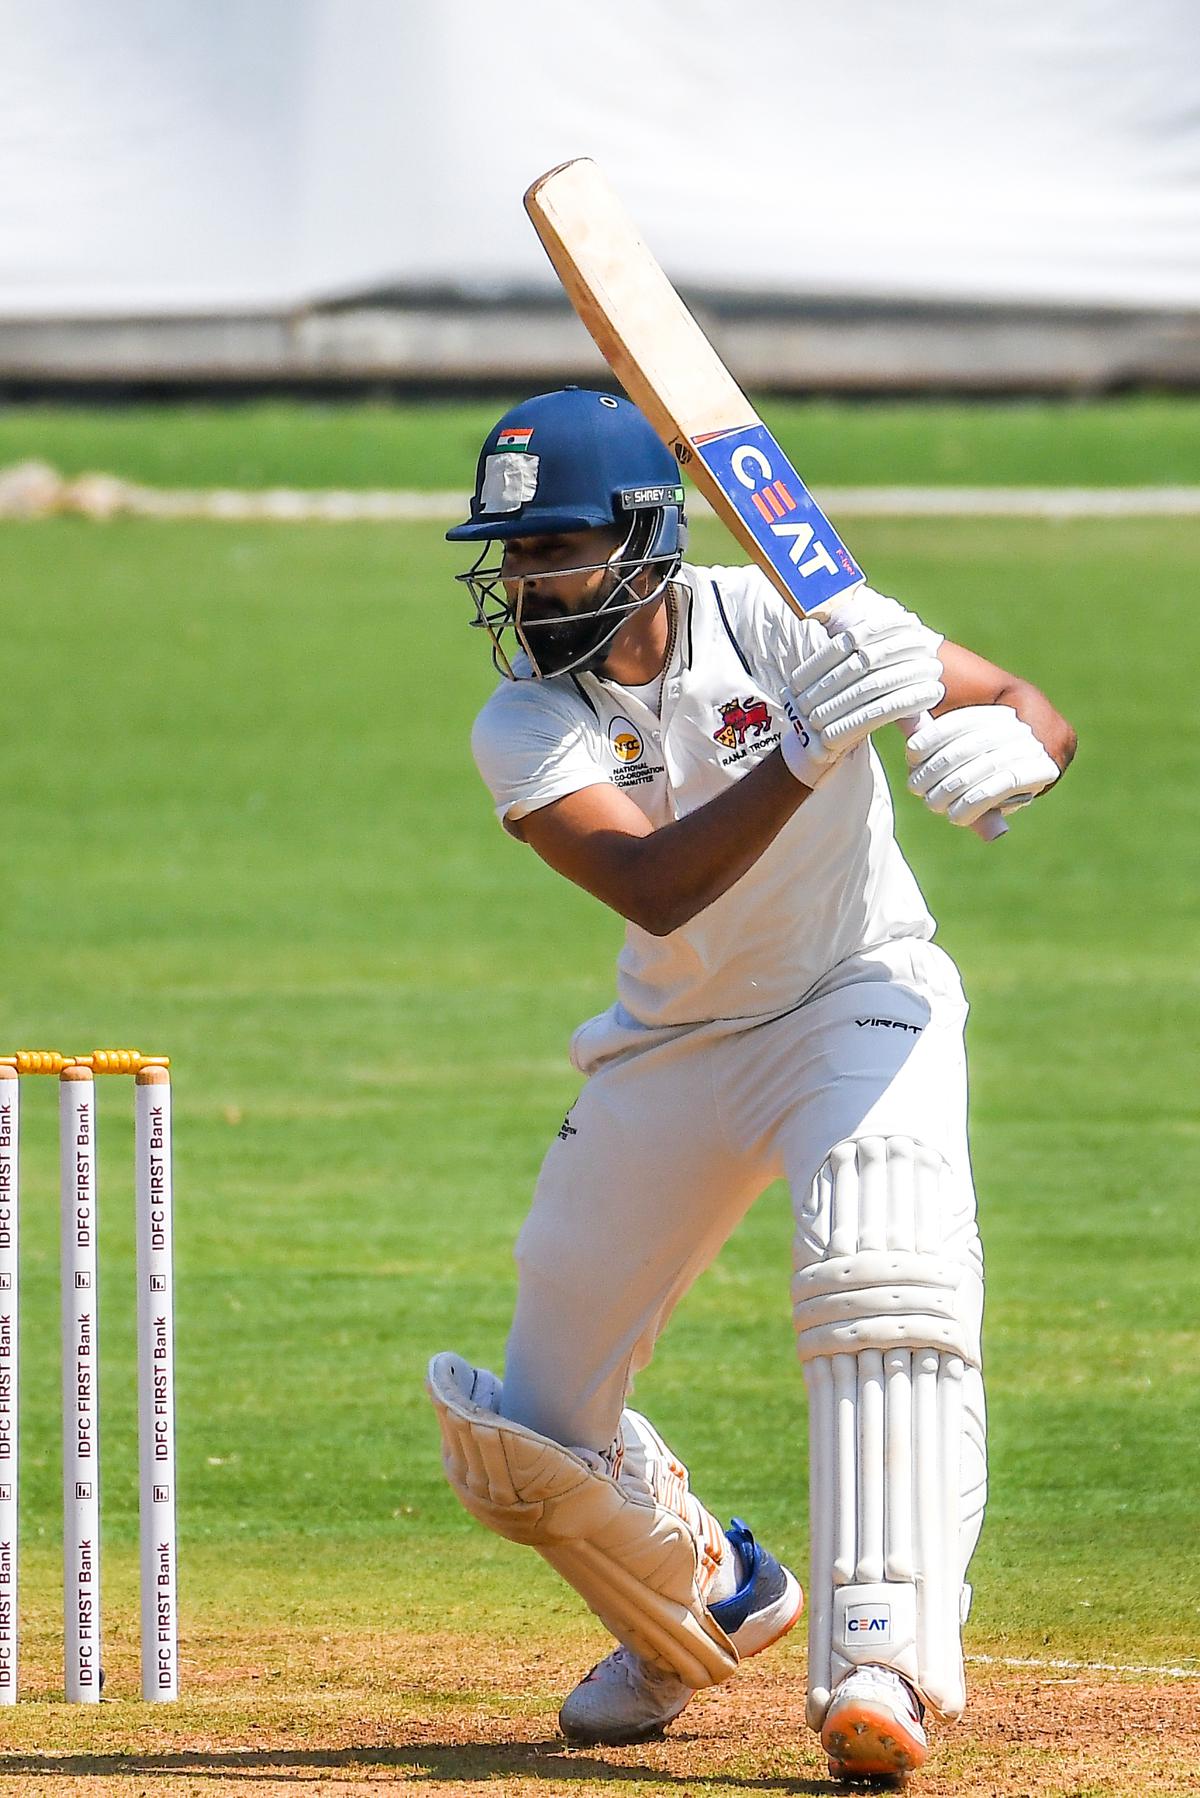 On a sticky wicket: The manner in which he has batted in the Ranji Trophy knockouts indicates that Shreyas Iyer is finding it hard to be in the moment.